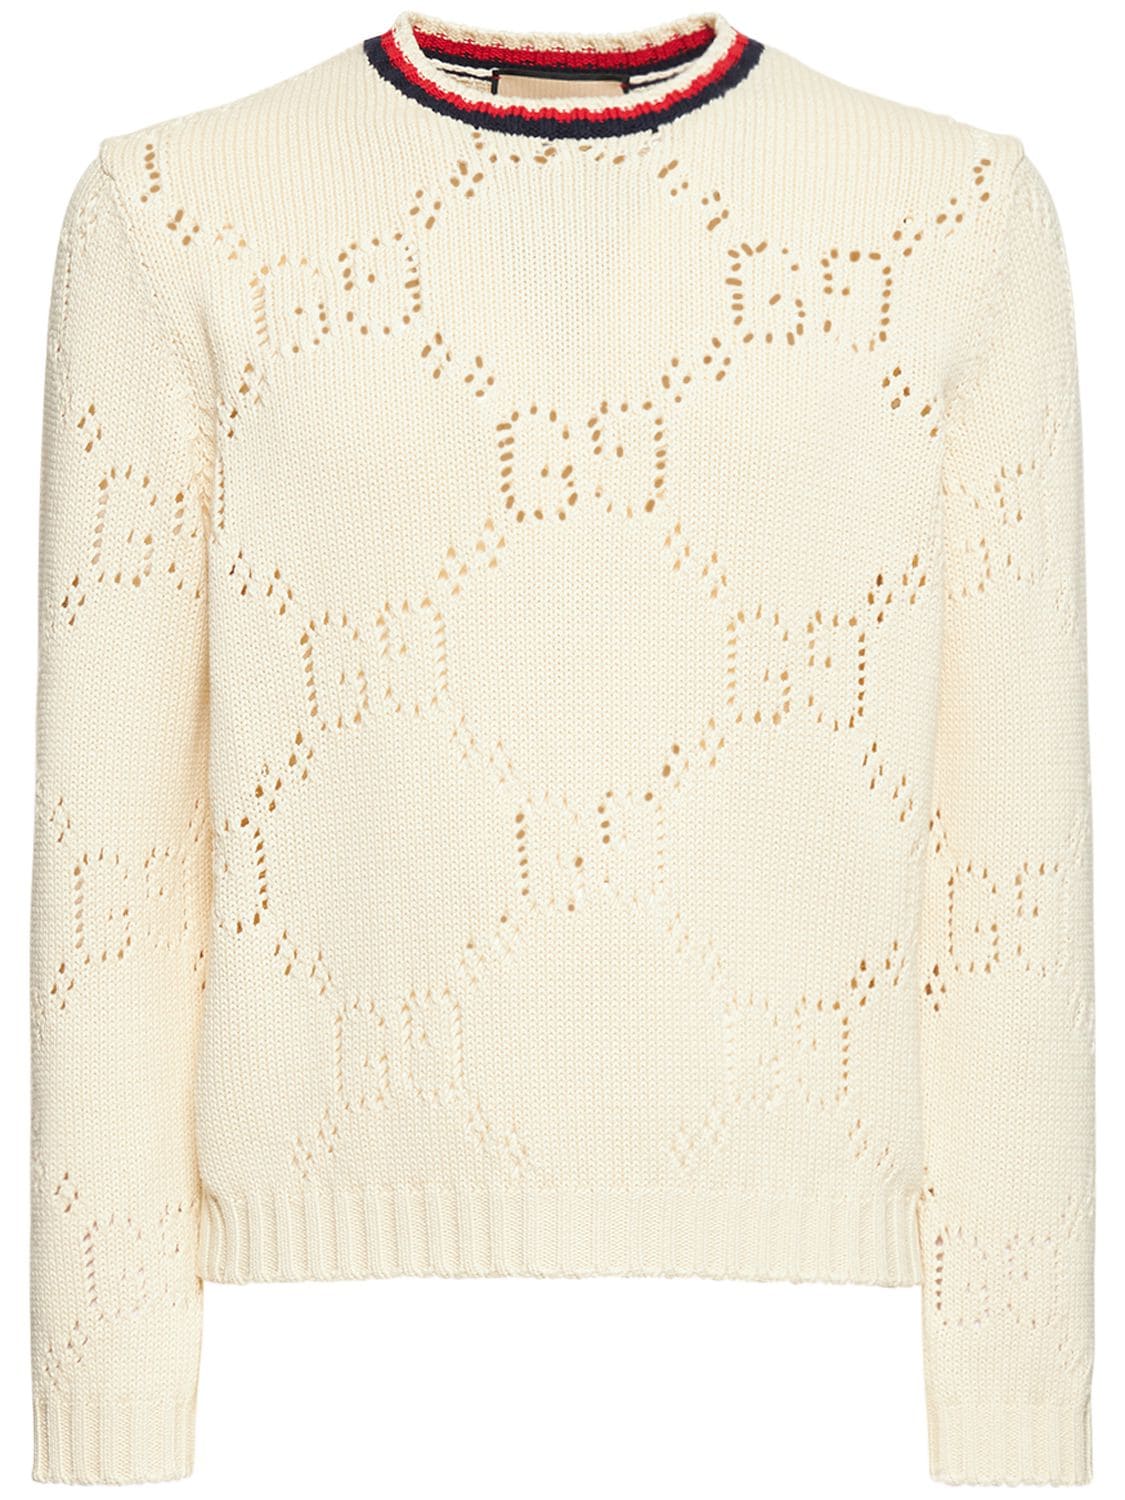 Perforated Gg Cotton Sweater